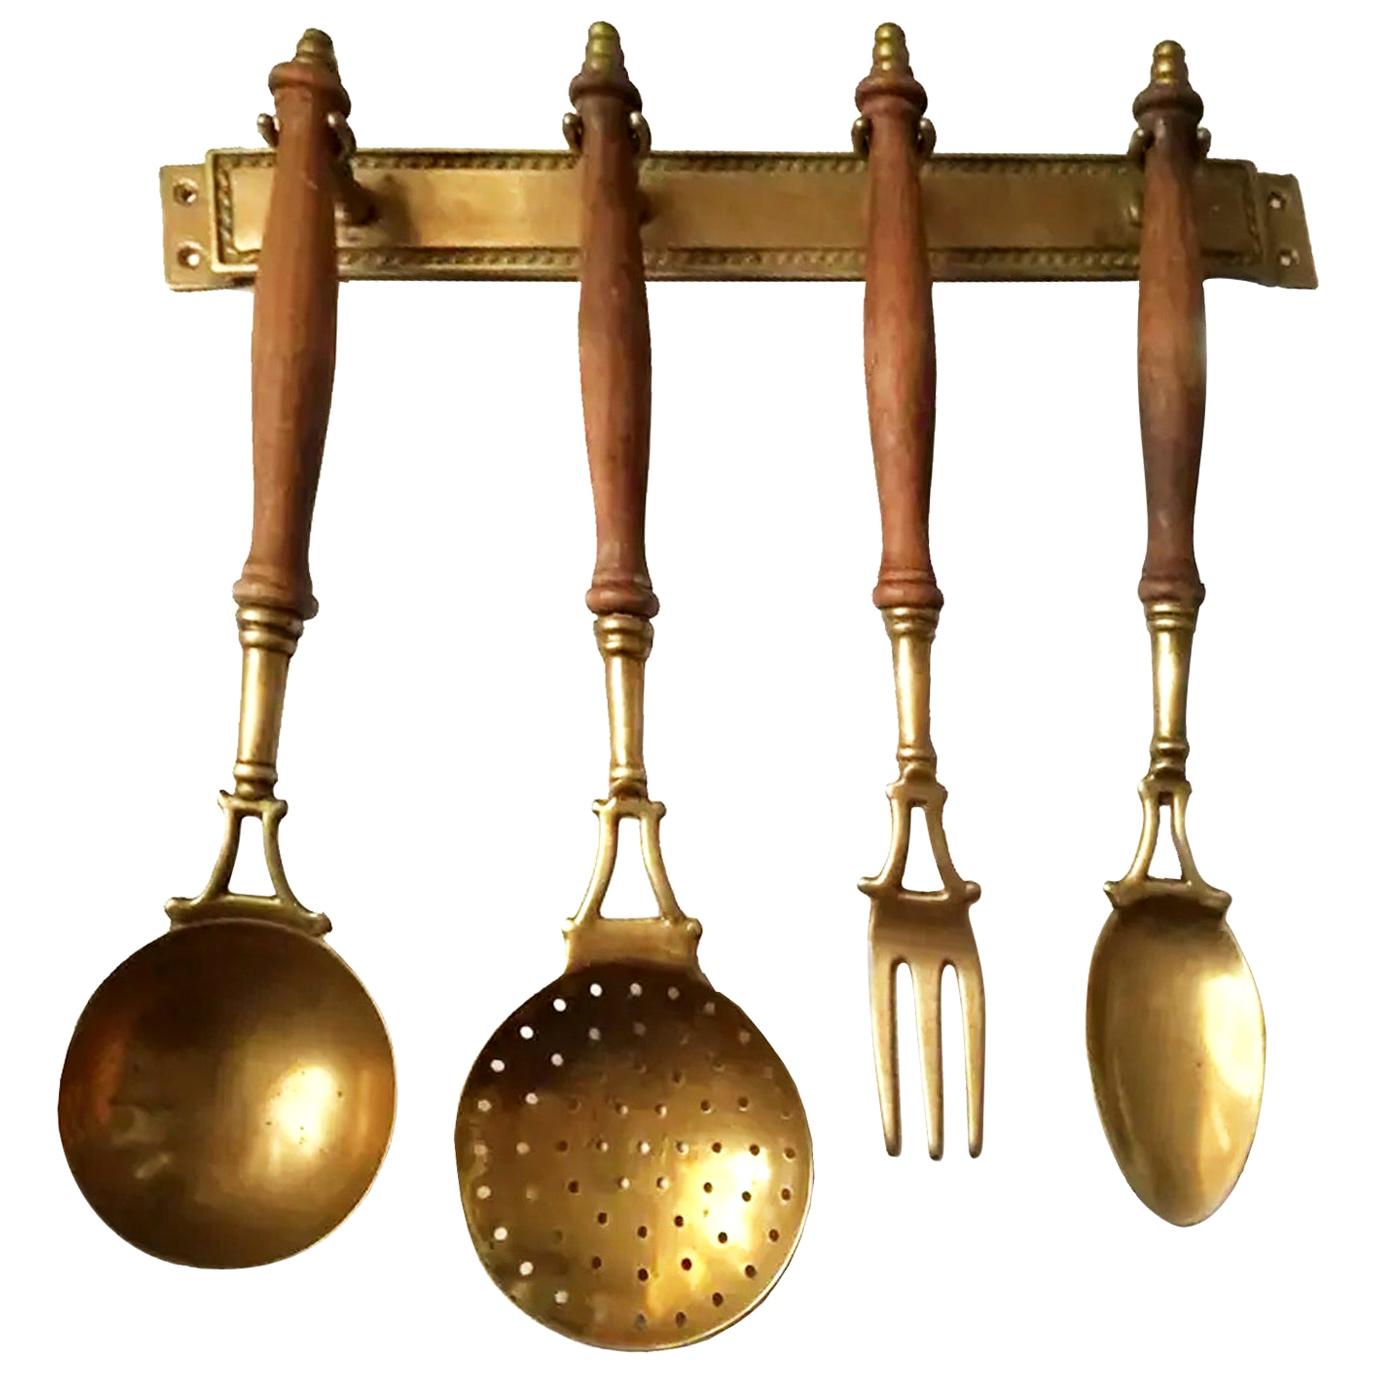 Old Kitchen Utensils Made of Brass with Hanging Bar, Early 20th Century